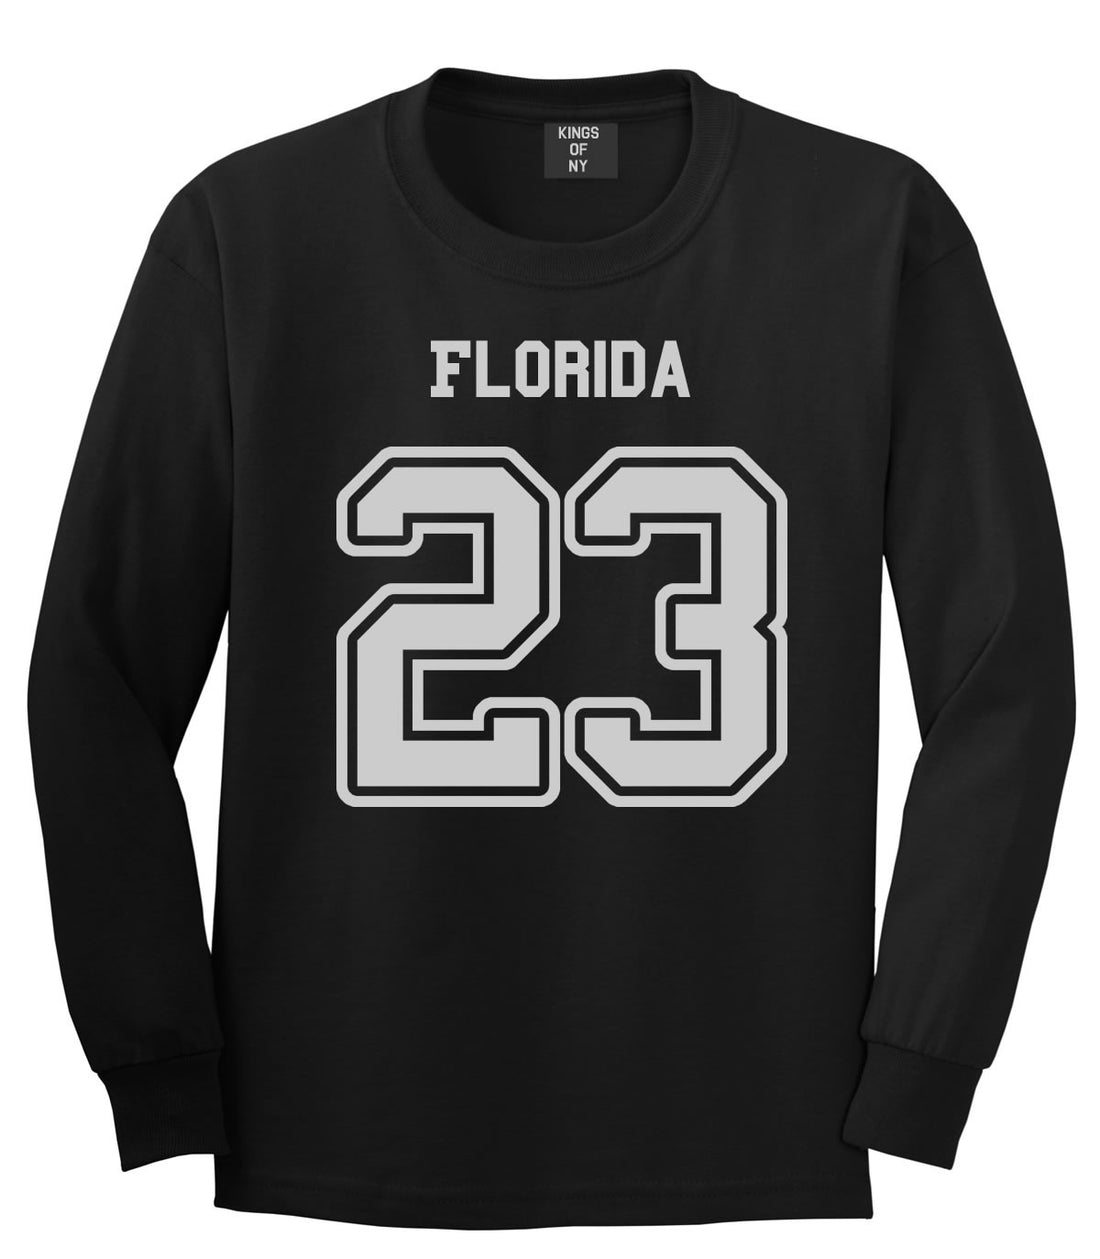 Sport Style Florida 23 Team State Jersey Long Sleeve T-Shirt By Kings Of NY